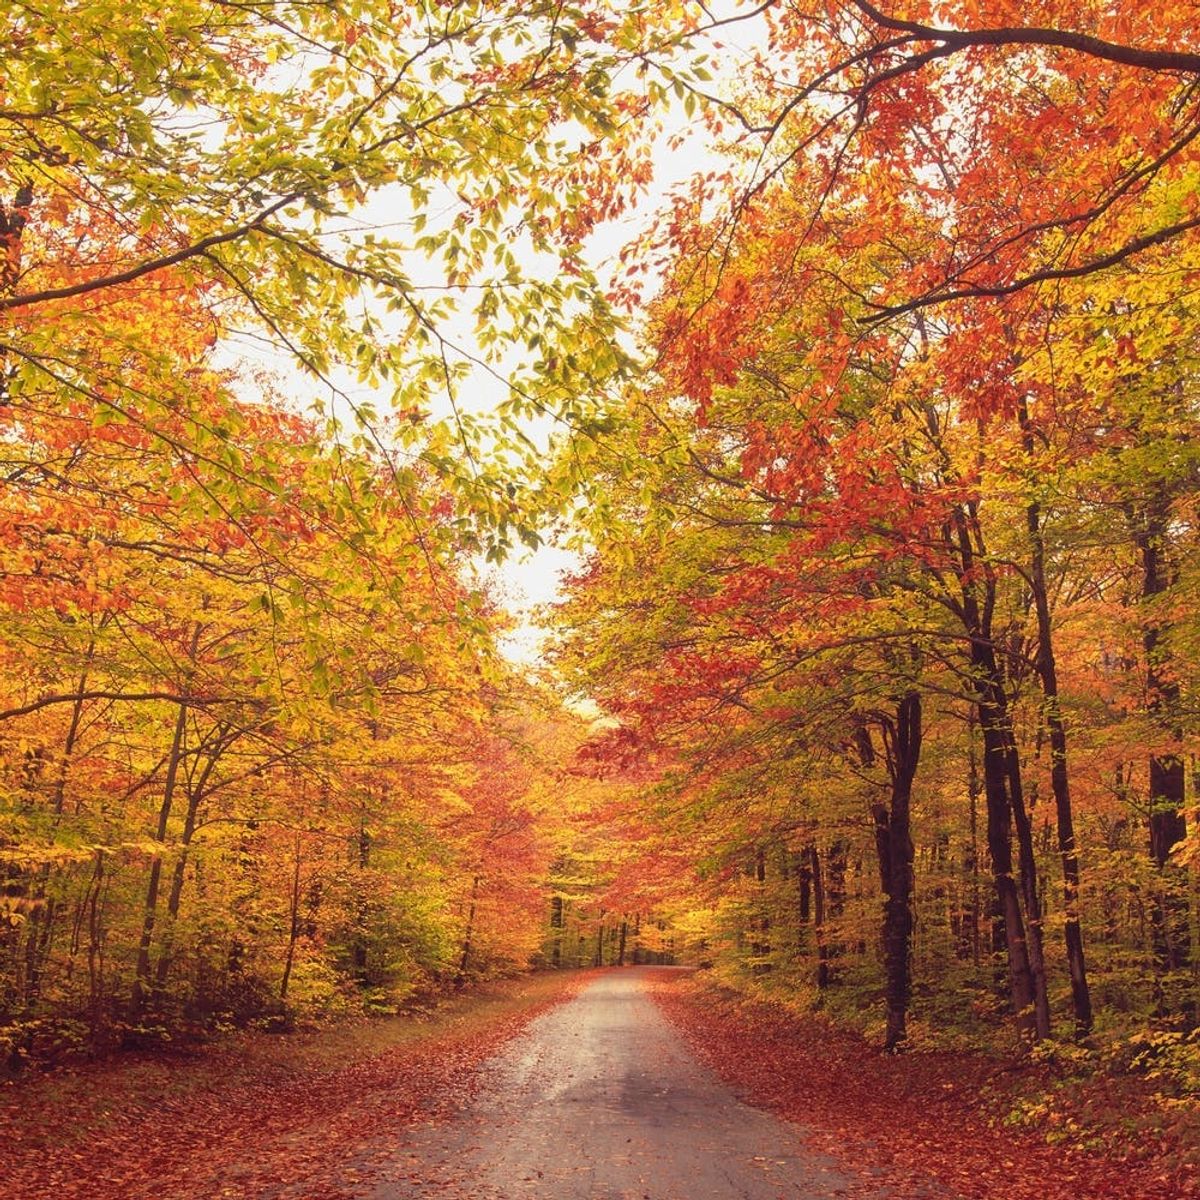 Here’s When and Where to See Peak Fall Foliage